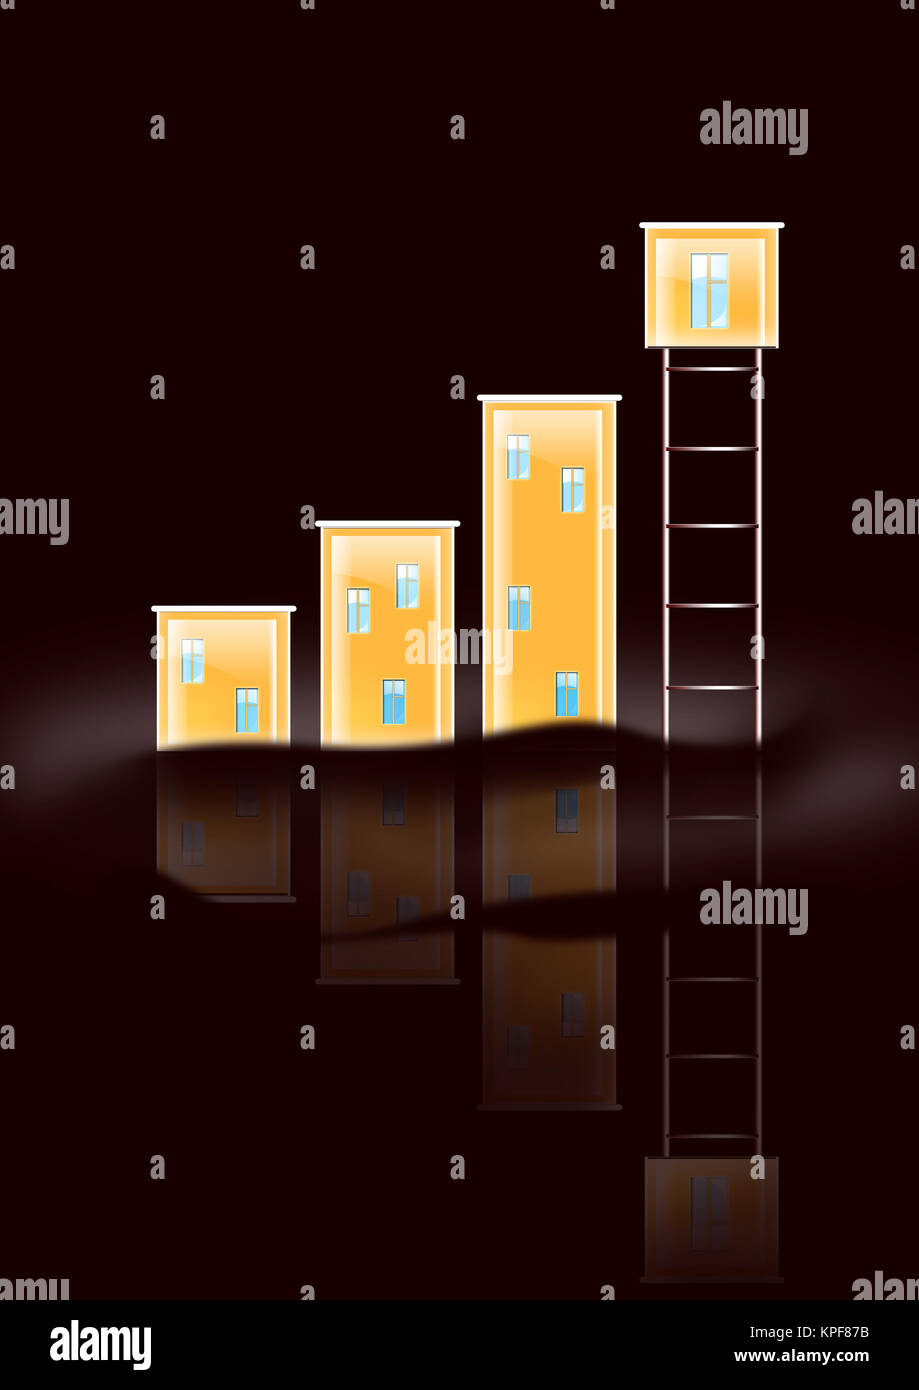 Business Artwork Diagram With Houses. 2D Graphics, Computer Design Stock Photo